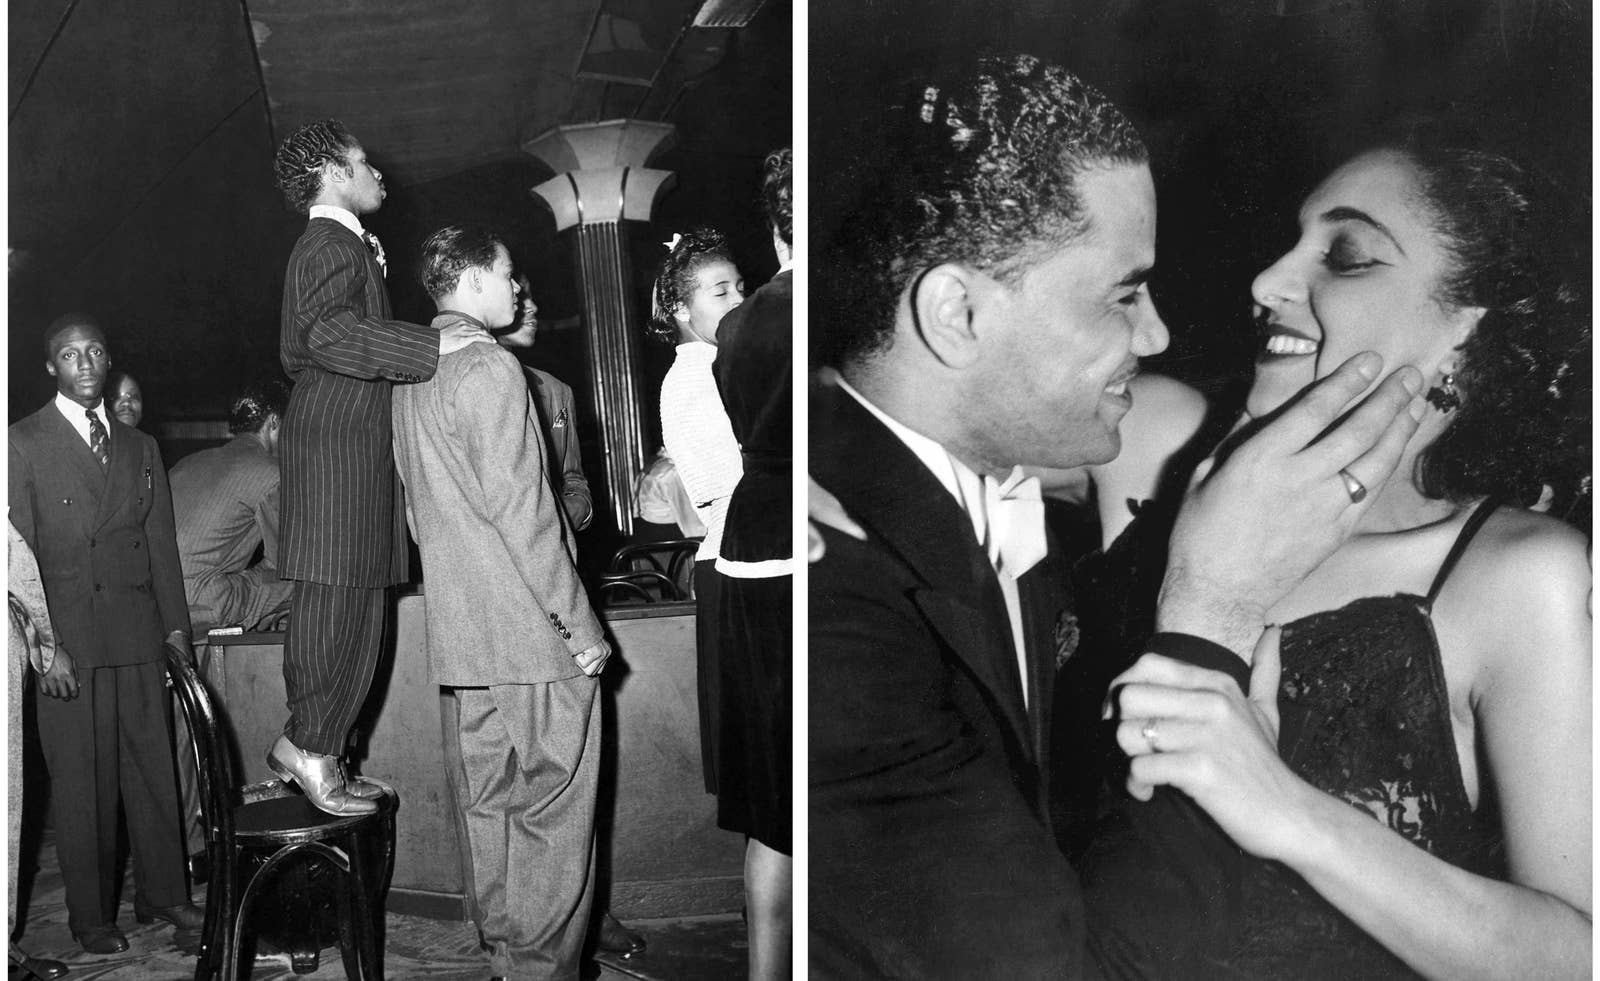 America In The 1920s And 30s Photos Of The Harlem Renaissance